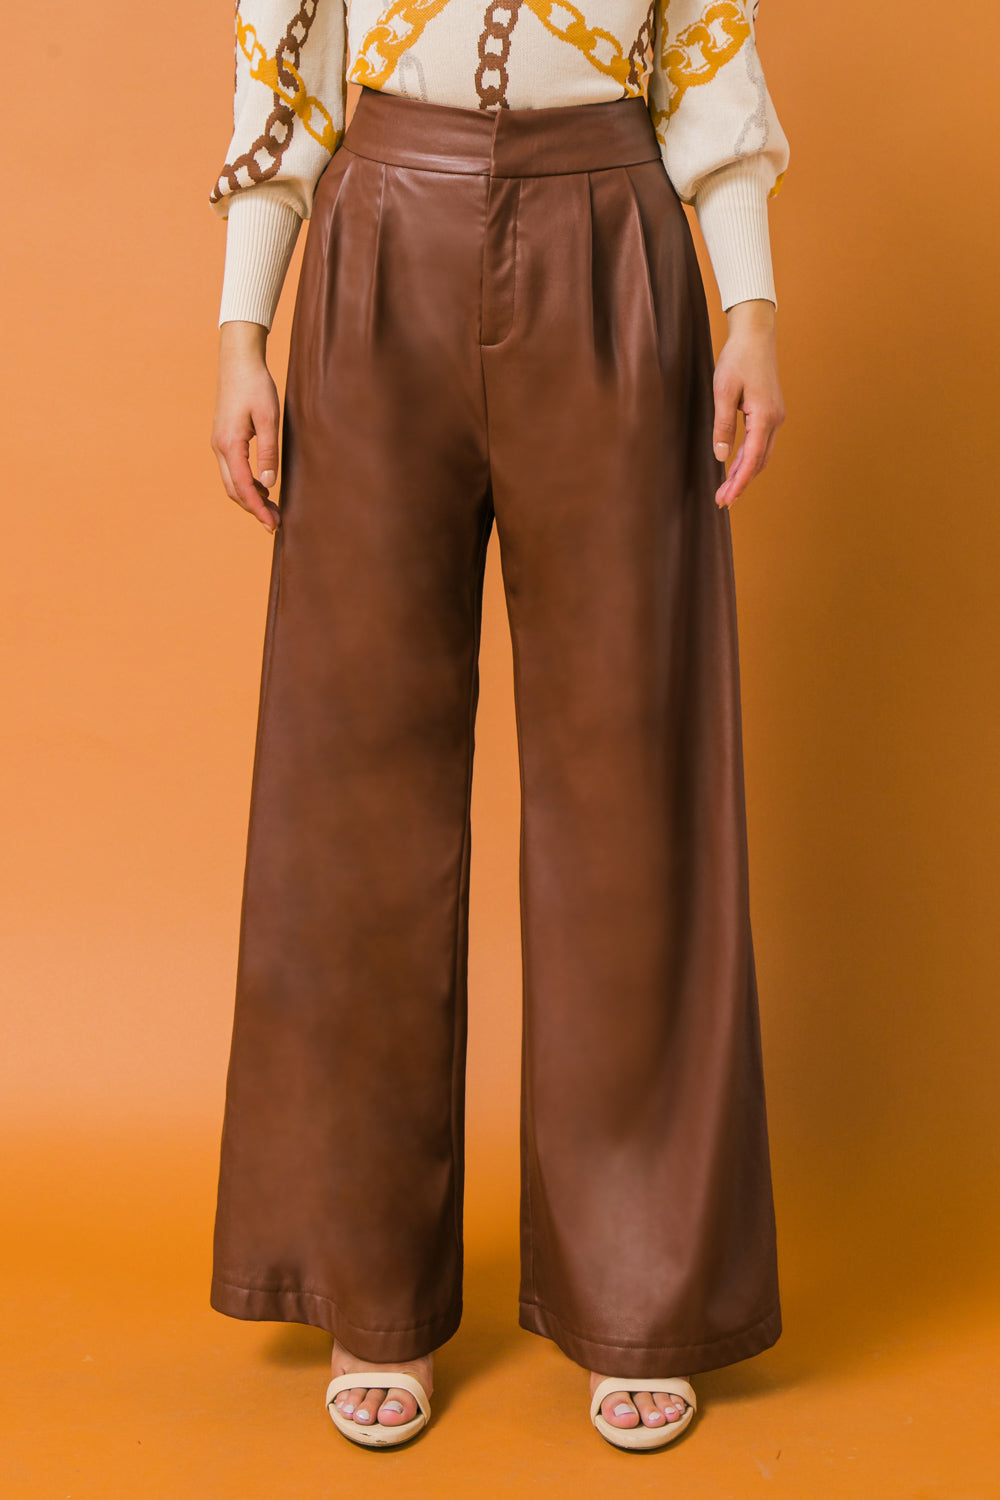 MATCHED ENERGY LEATHER PANTS